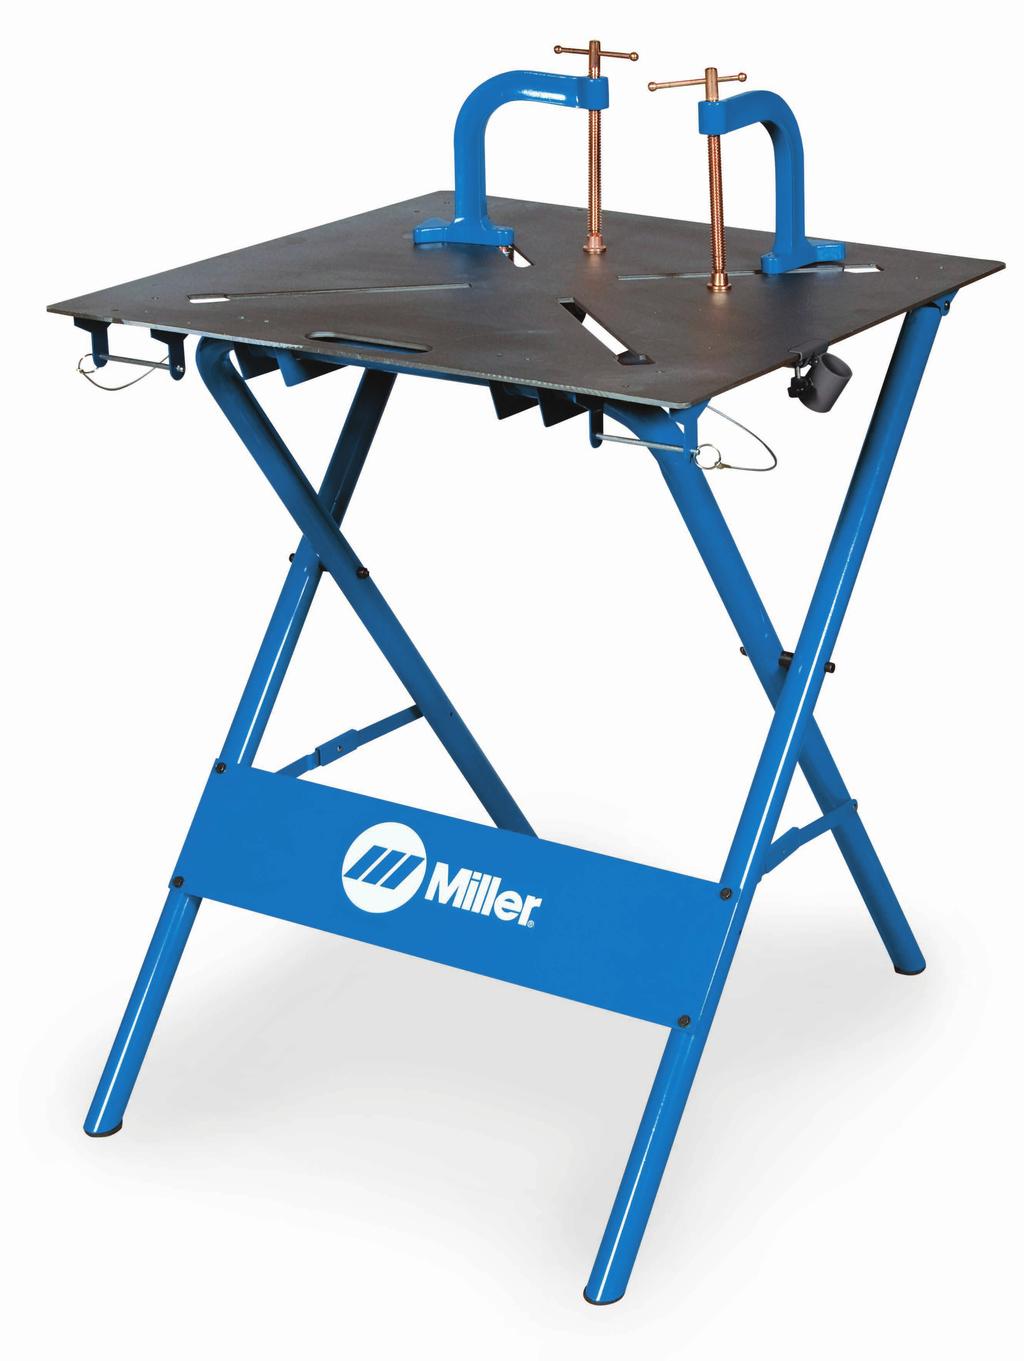 MIL300837 Miller ArcStation 30FX Welding Table $279.99 MIL300850 X-Clamps 5 $39.99 each The Miller ArcStation 30FX is the ideal work surface for the welder who requires portability and space savings.